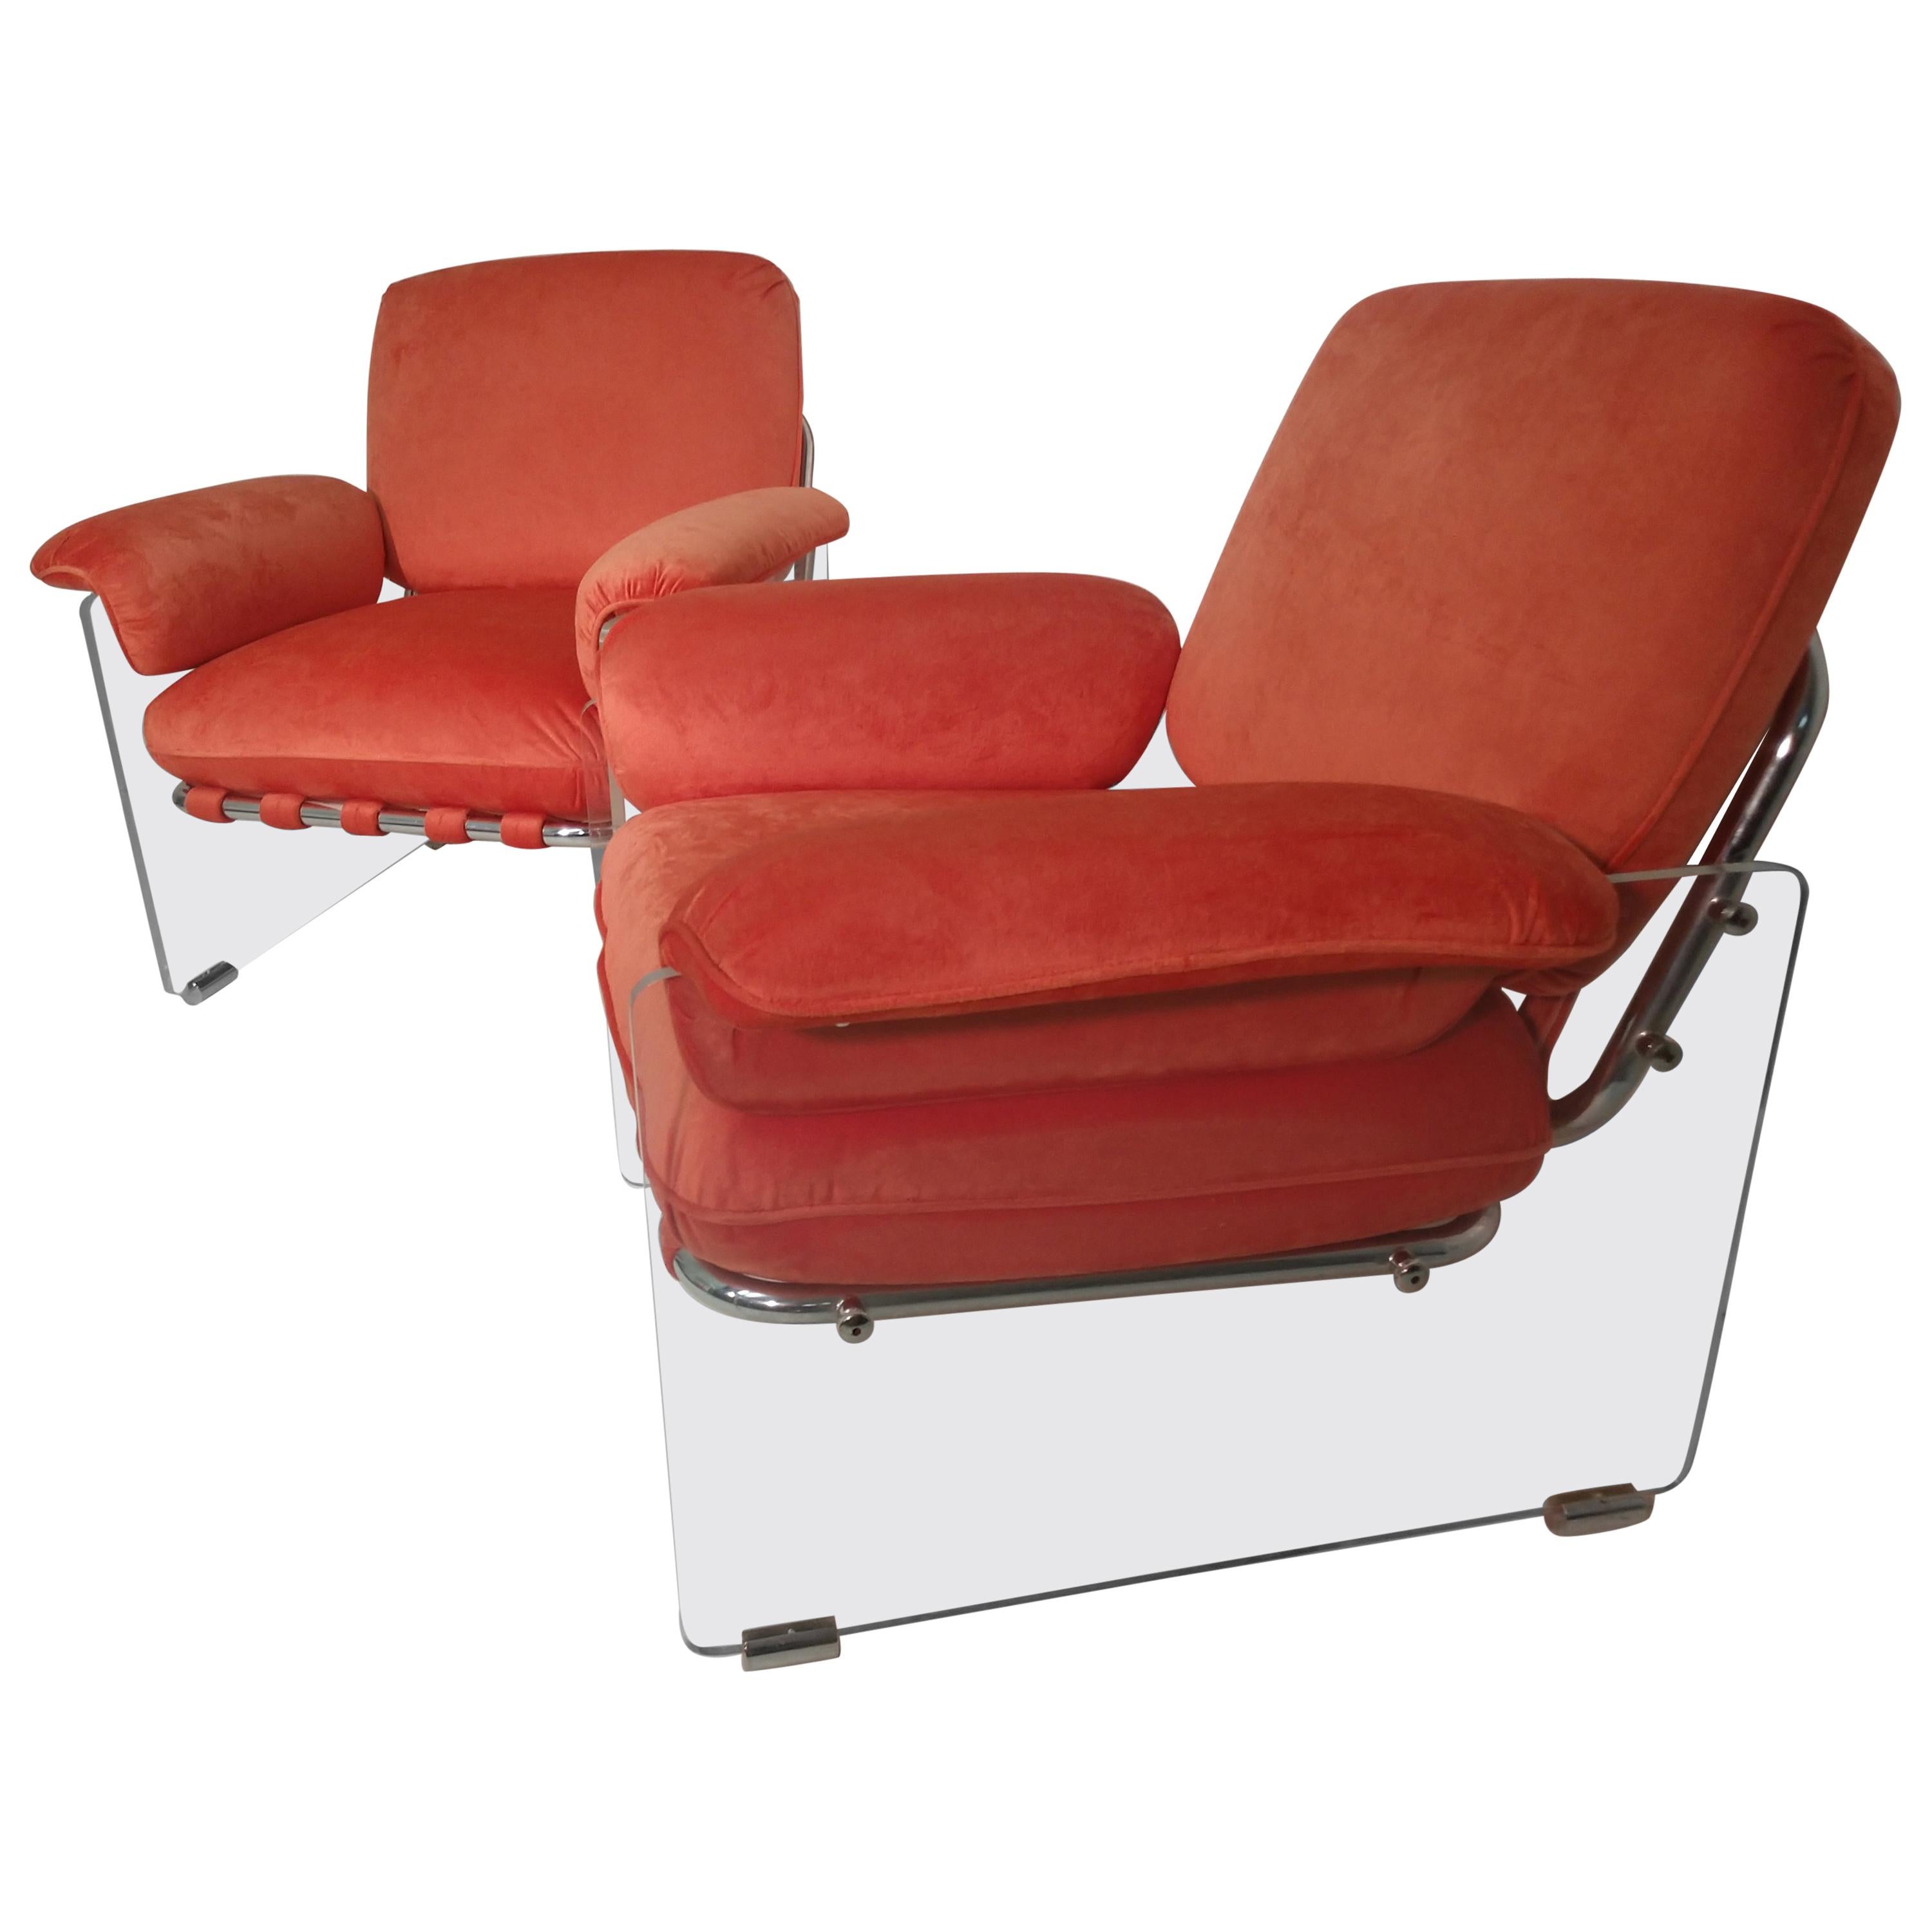 Pair of Mid-Century Modern Pace Argenta Lucite Lounge Chairs